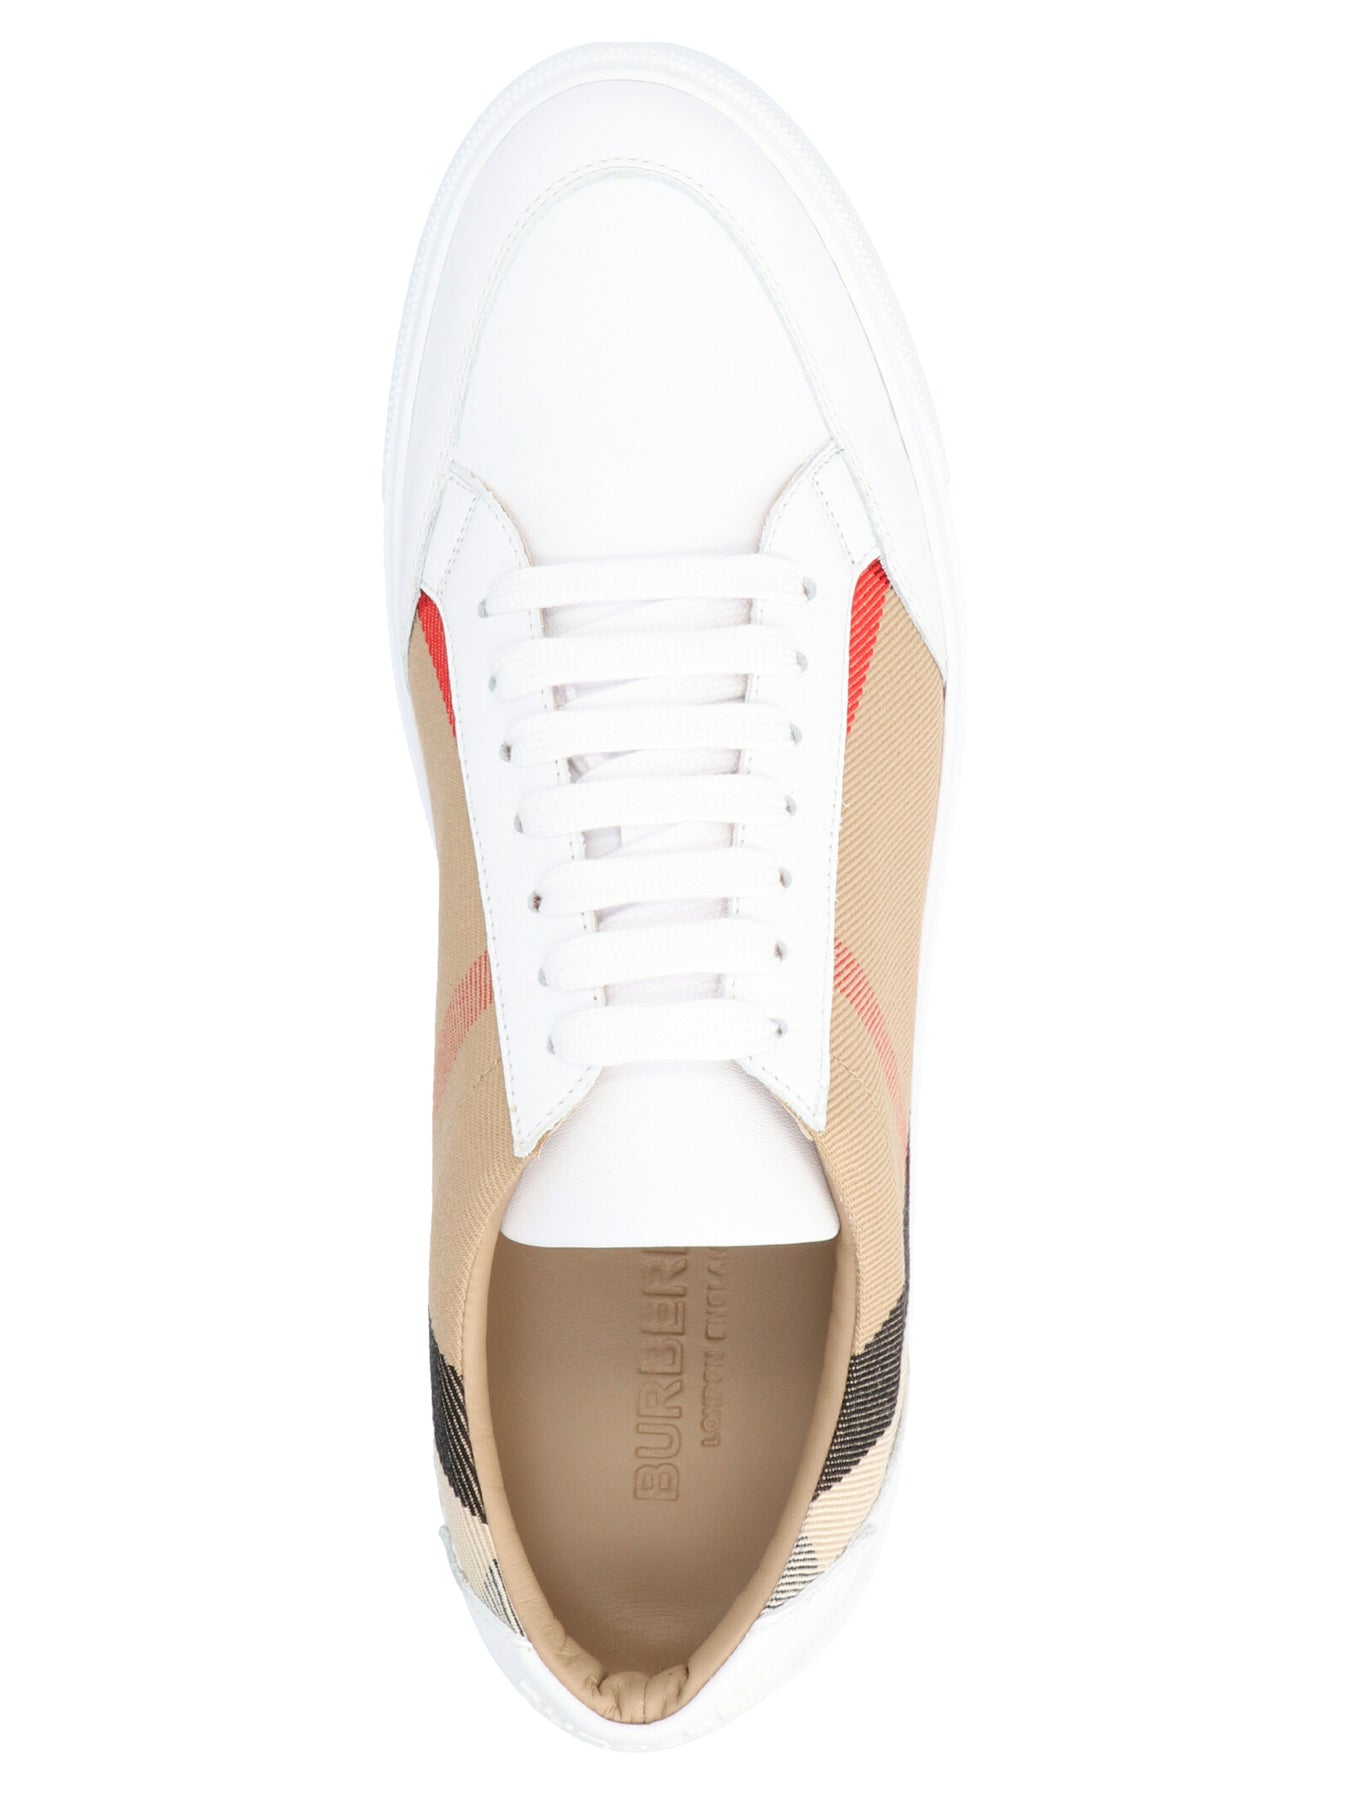 Shop Burberry New Salmond Sneakers Multicolor